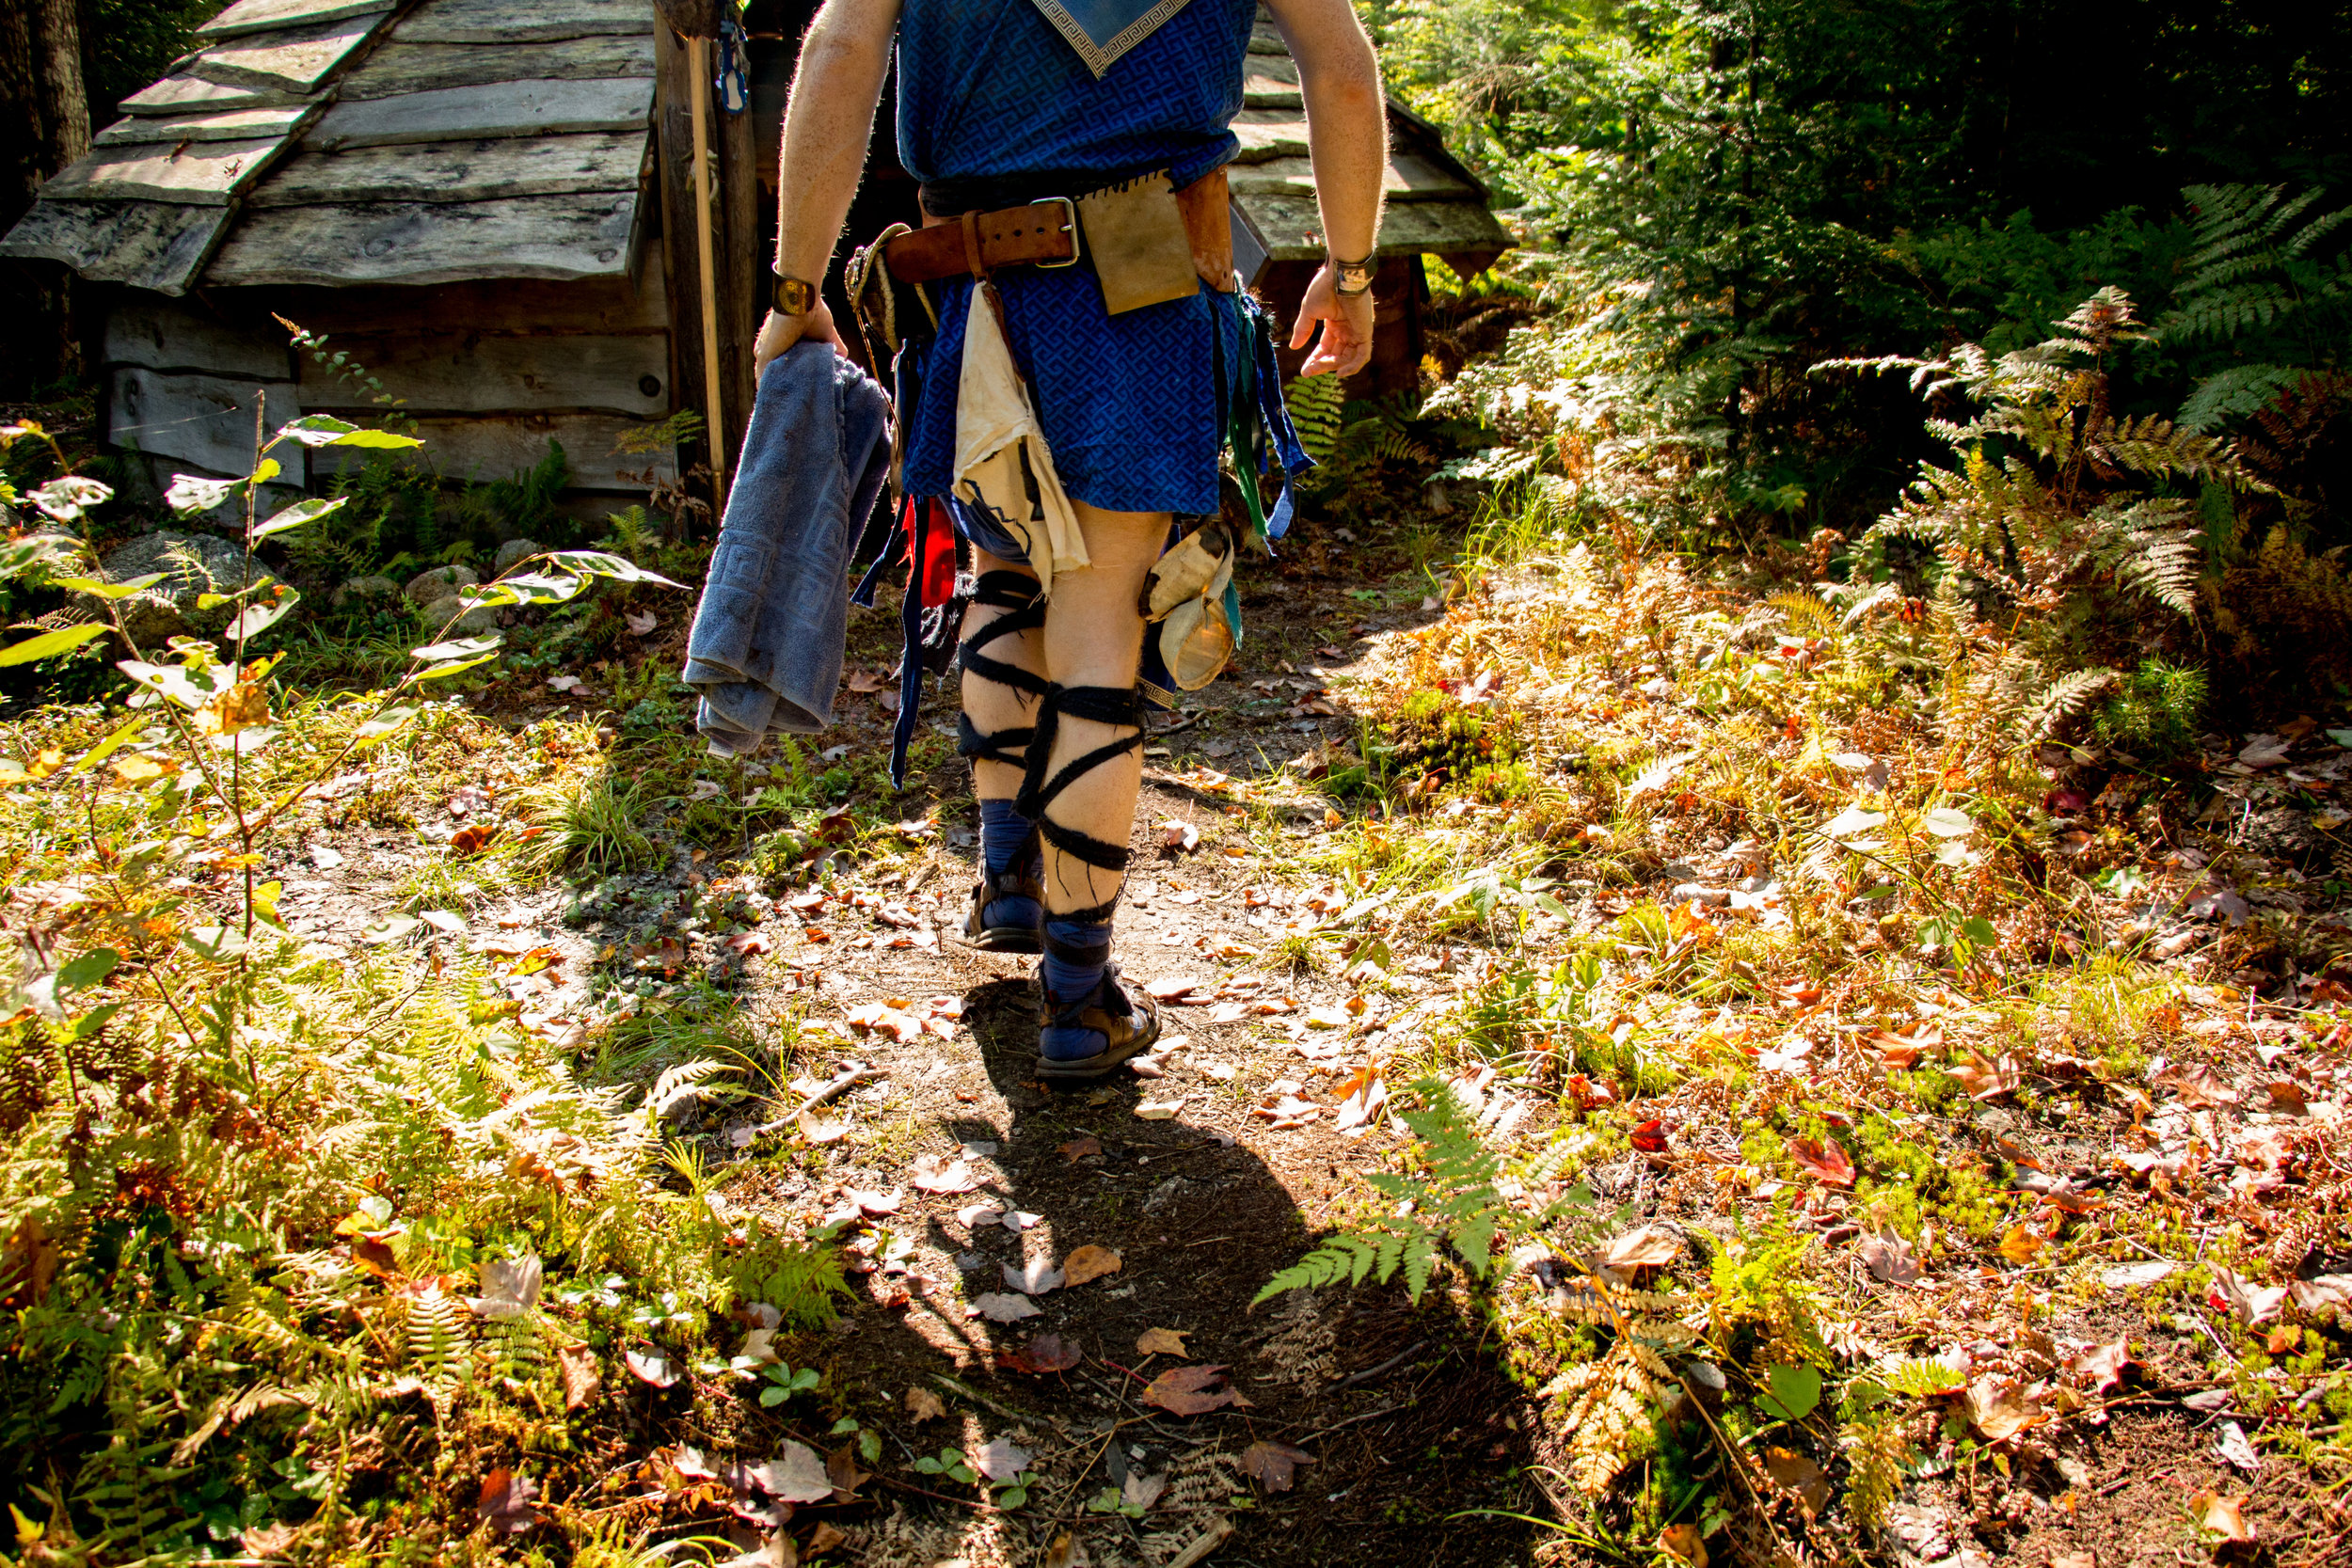  For 8 days every summer, Dagorhir chapters come together in Pennsylvania at an event called Ragnorok. Participants fight in battles, sell and trade crafts, and socialize with other larpers. "My life is Ragnorok, my birthday, Ragnorok, " says Kevin D